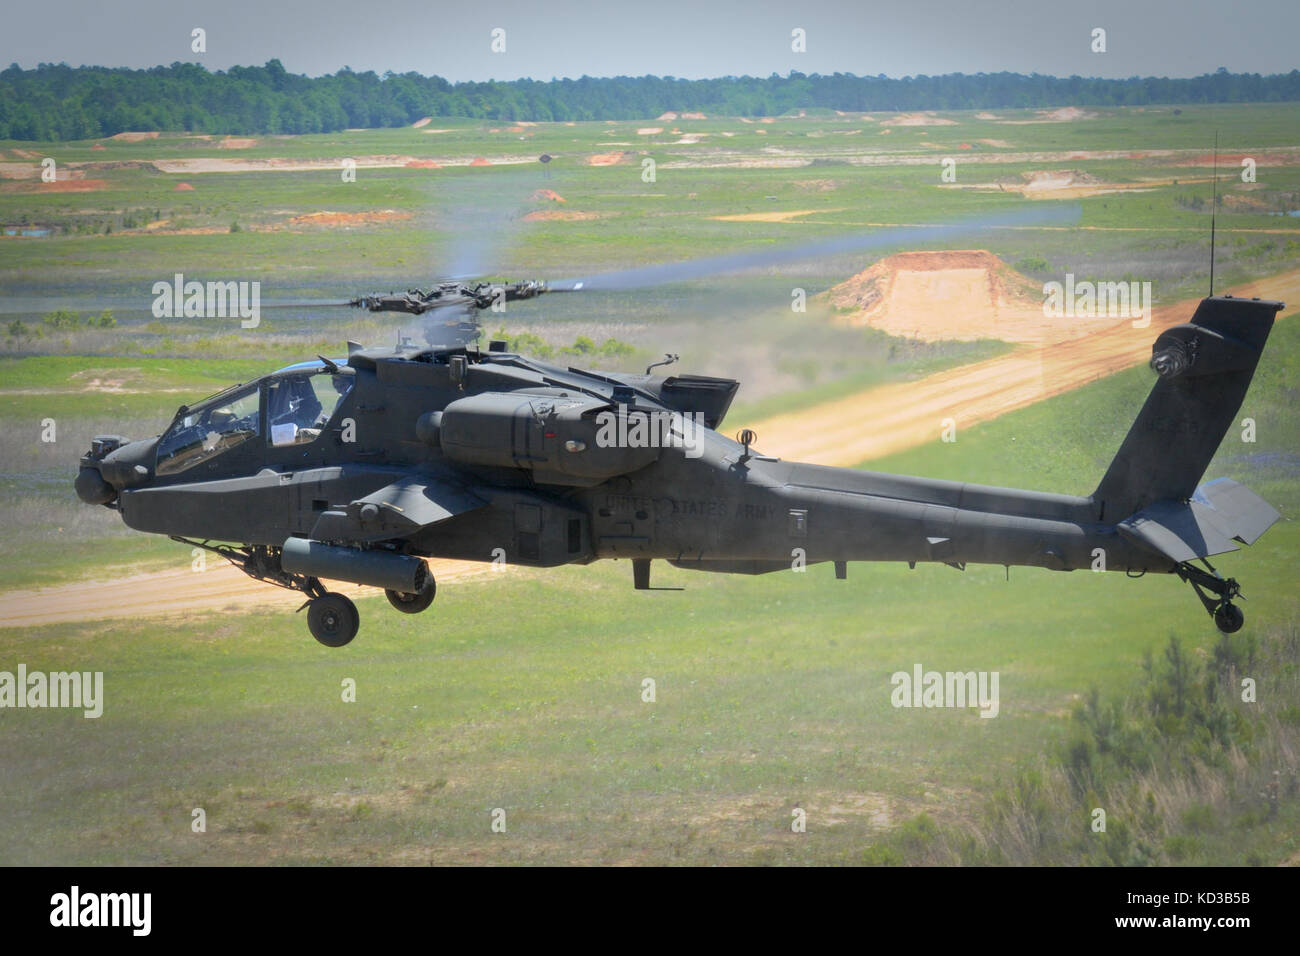 A U.S. Army AH-64D Apache assigned to S.C. Army National Guard’s 1/151 Attack Reconnaissance Battalion enters the range at Ft. Stewart, Ga., on May 4, 2014, to begin gunnery exercises as part of the unit’s annual training. Crews were tested with a variety of scenarios where they fired 30mm ammunition and point detonation rockets. (U.S. Army National Guard photo by. Sgt. Brian Calhoun/Released) Stock Photo